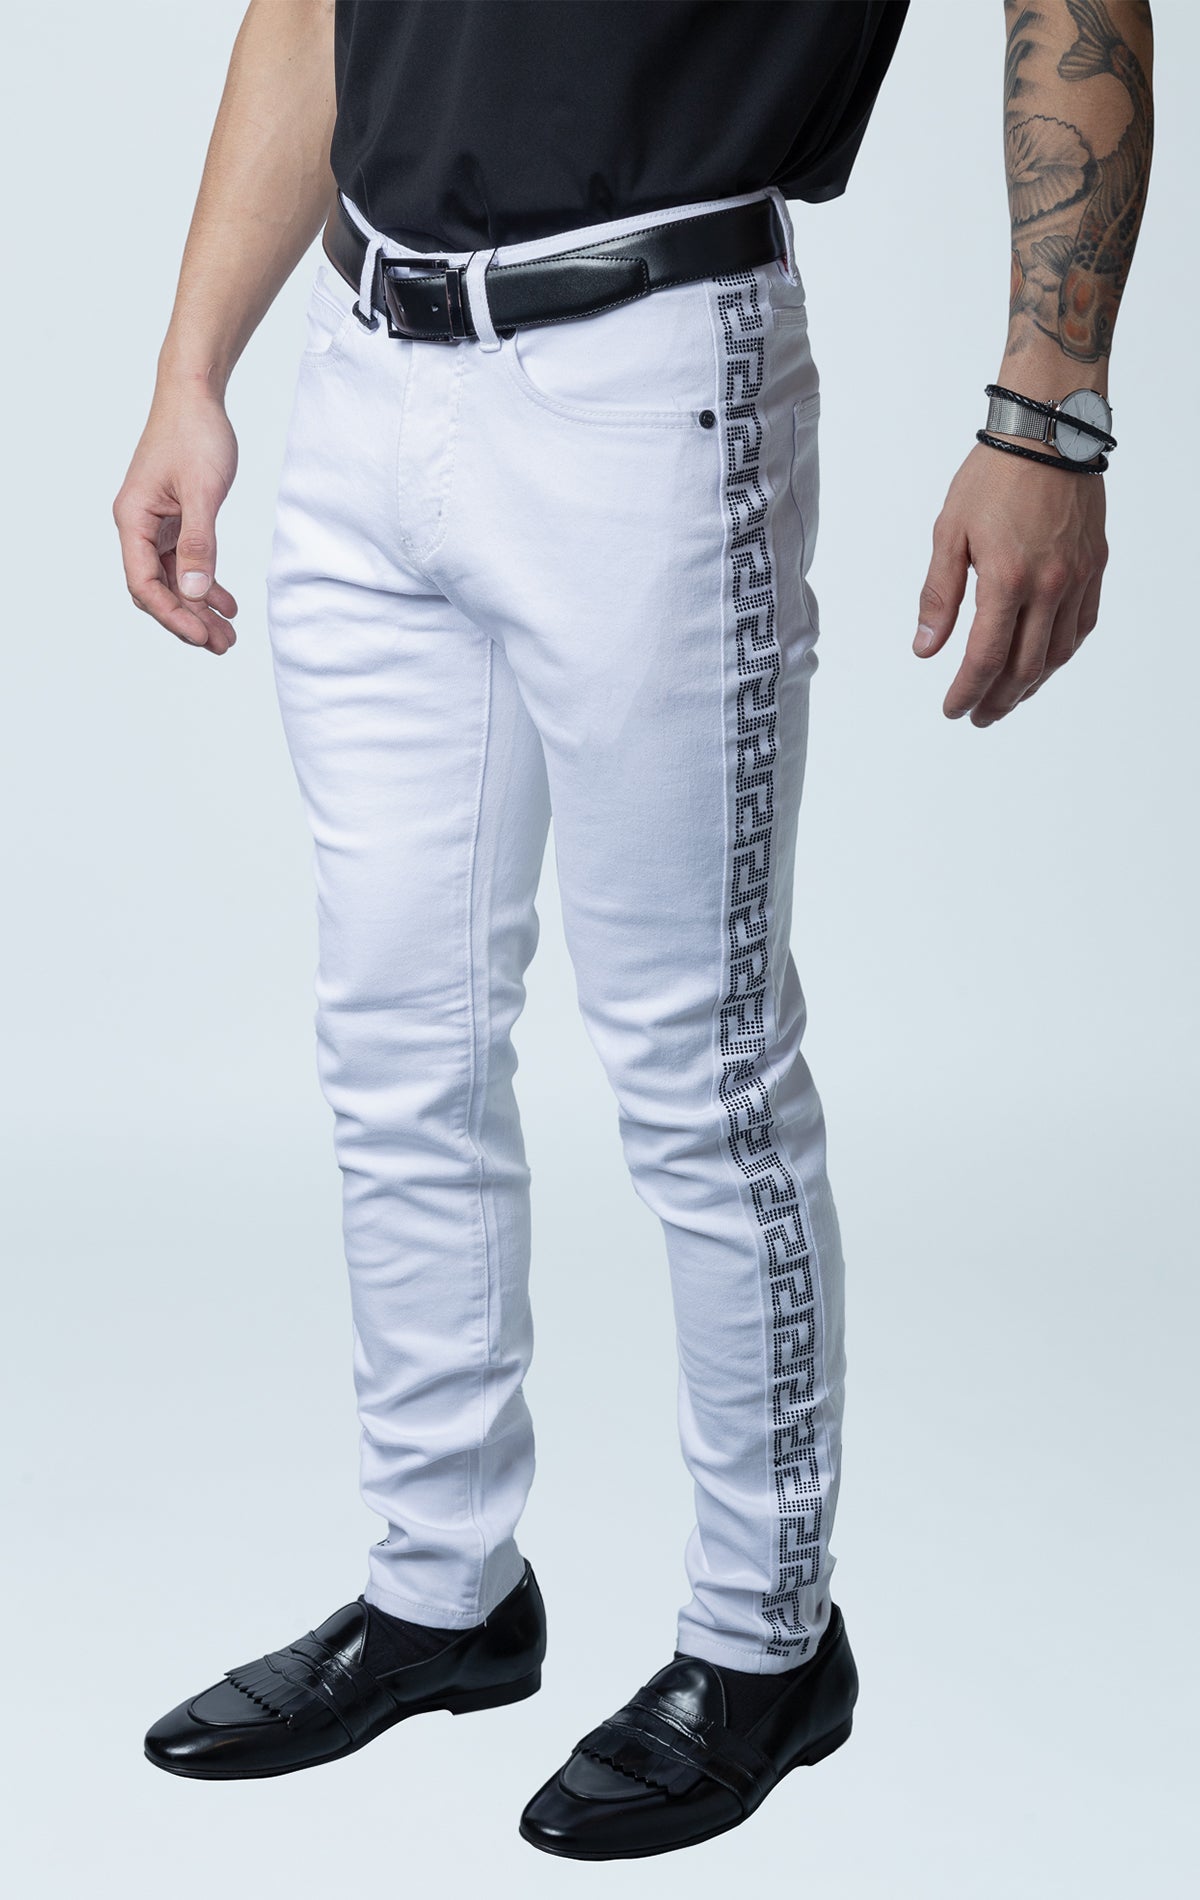 White high quality denim pants with side stripe taping.